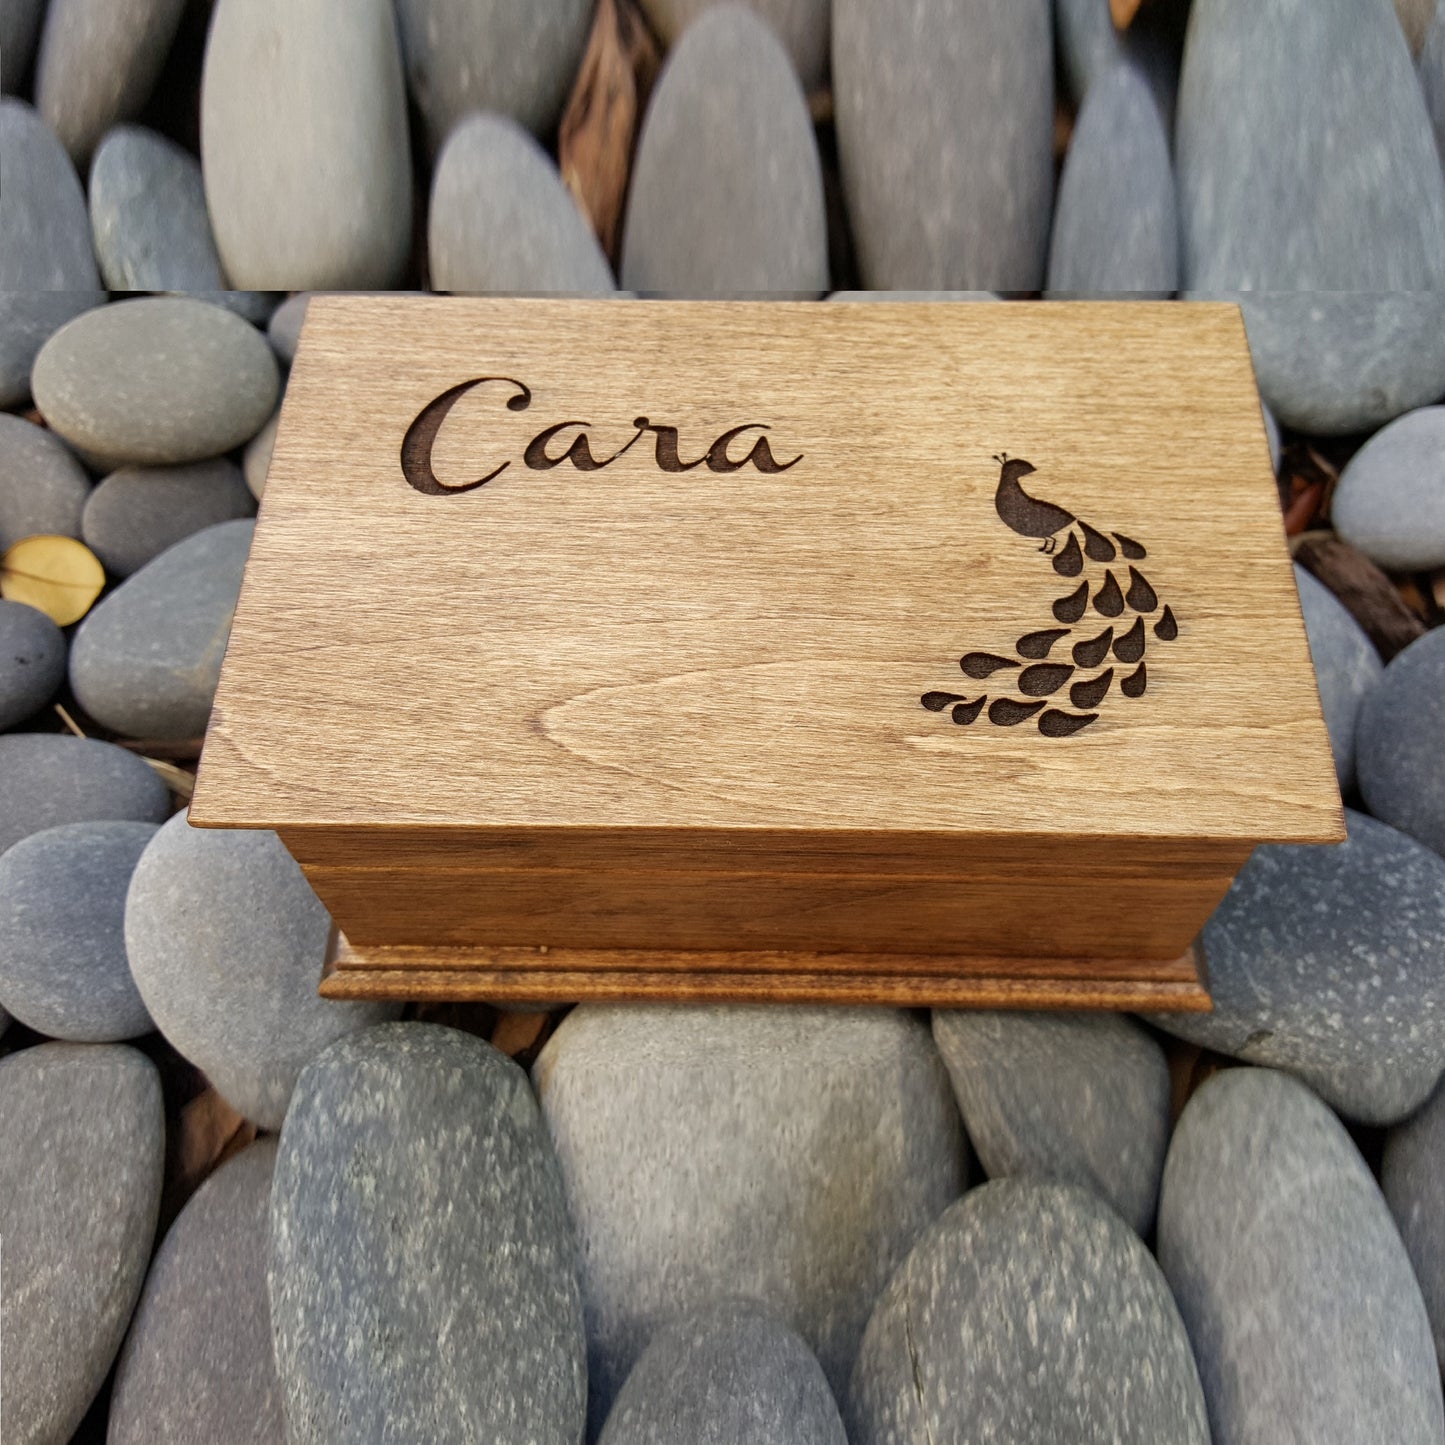 wooden jewelry box with name and a peacock engraved on top, custom-made by Simplycoolgifts, perfect for daughter's birthday